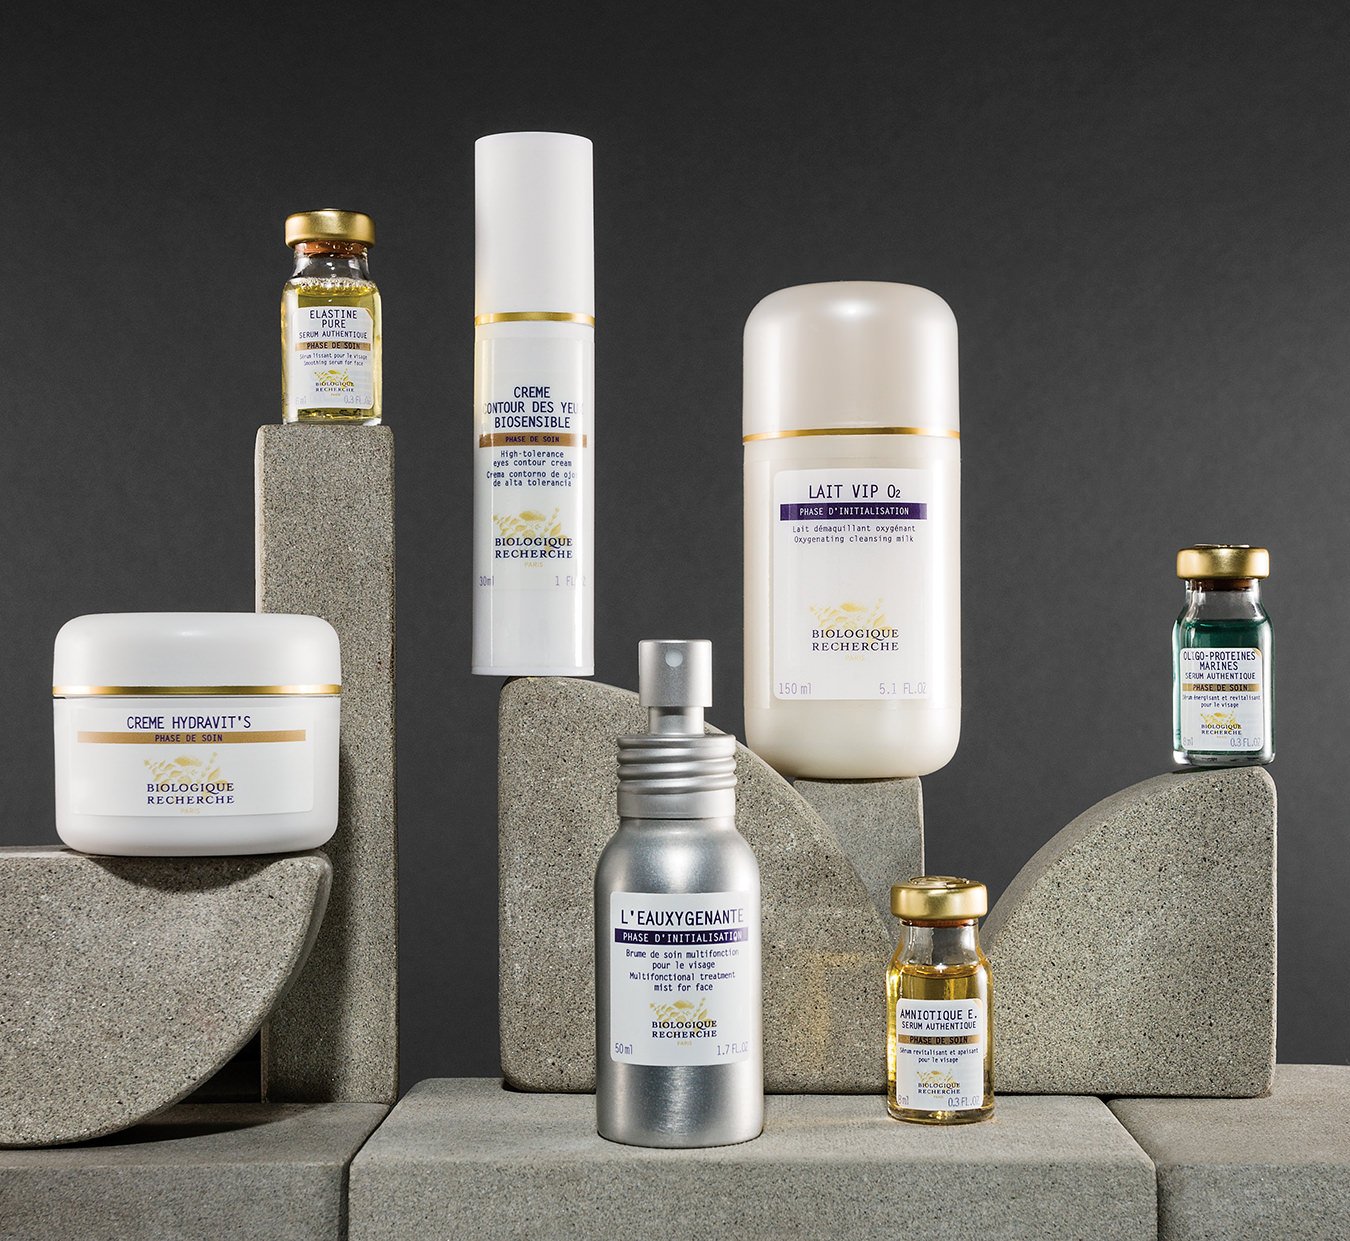 Luxury Skincare Brand Led by Research and Science